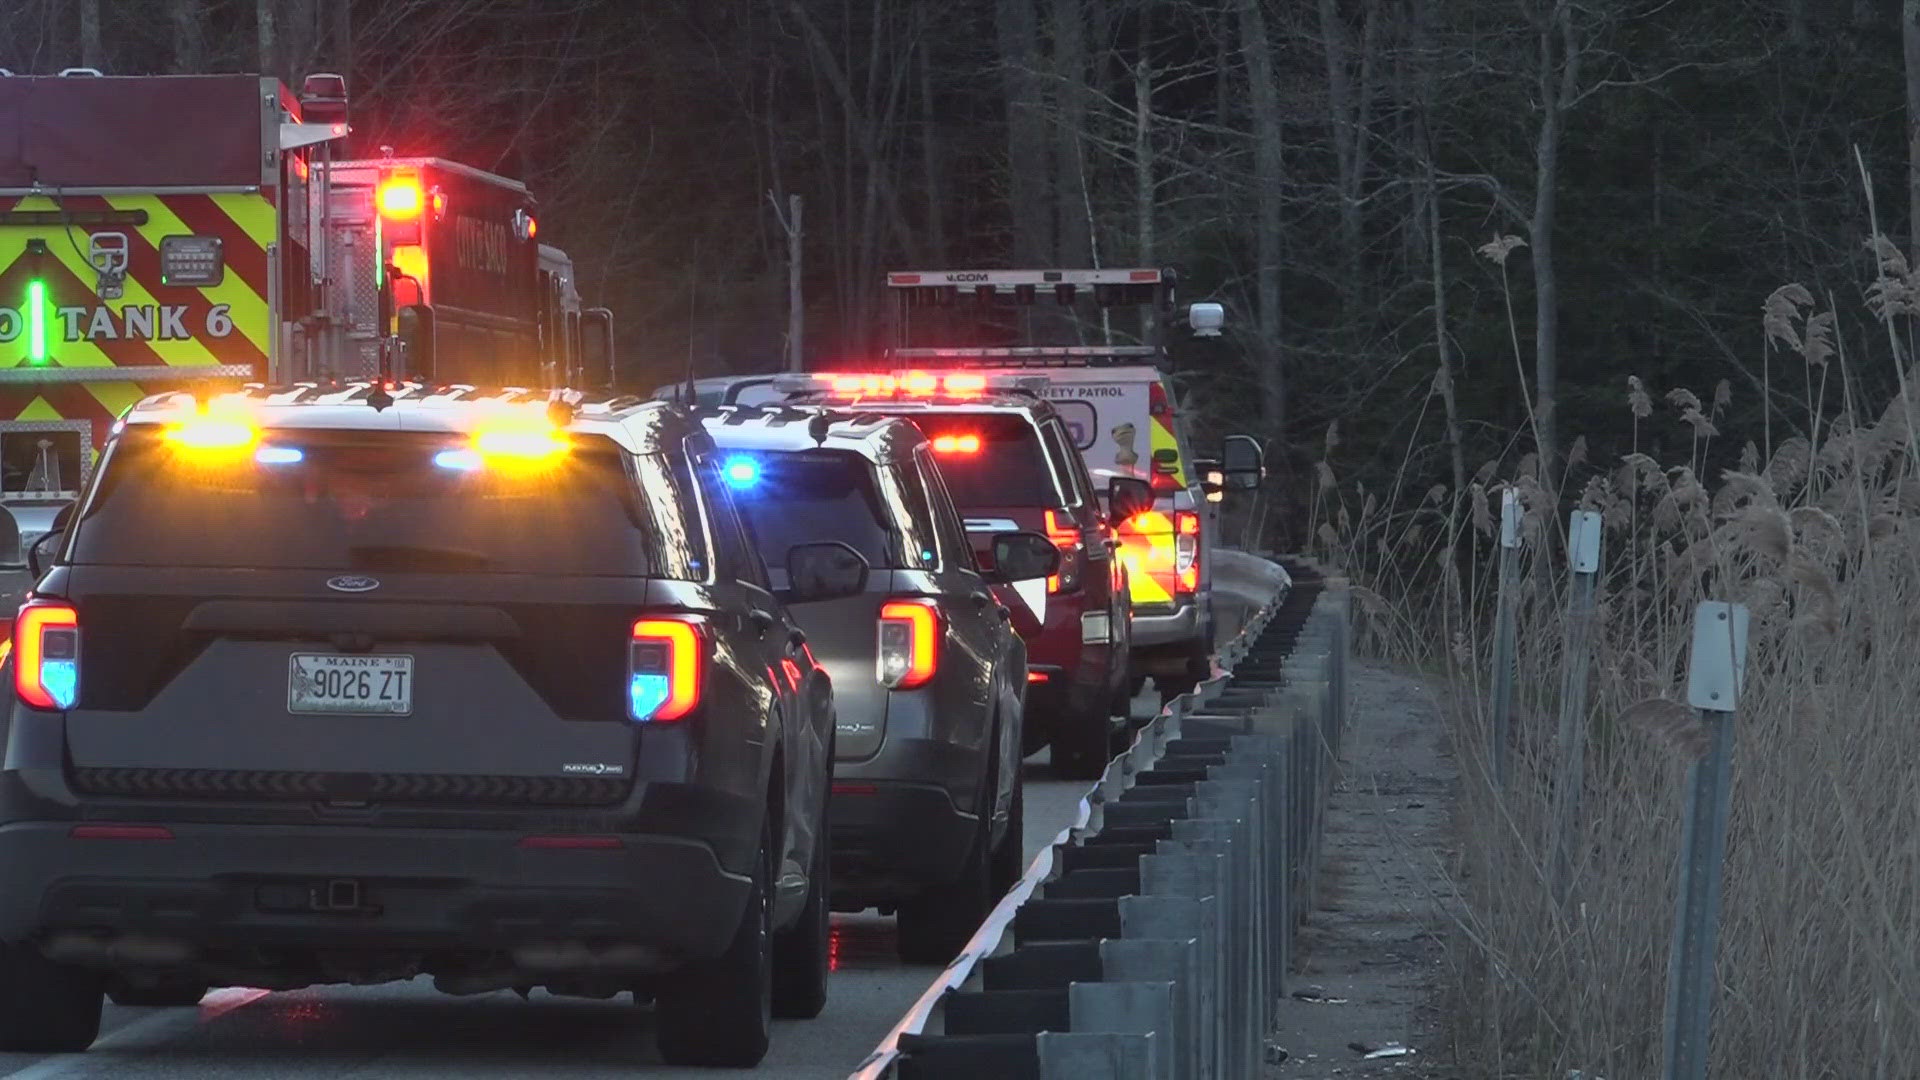 The crash occurred Friday evening on the southbound off-ramp of the Maine Turnpike in Biddeford.